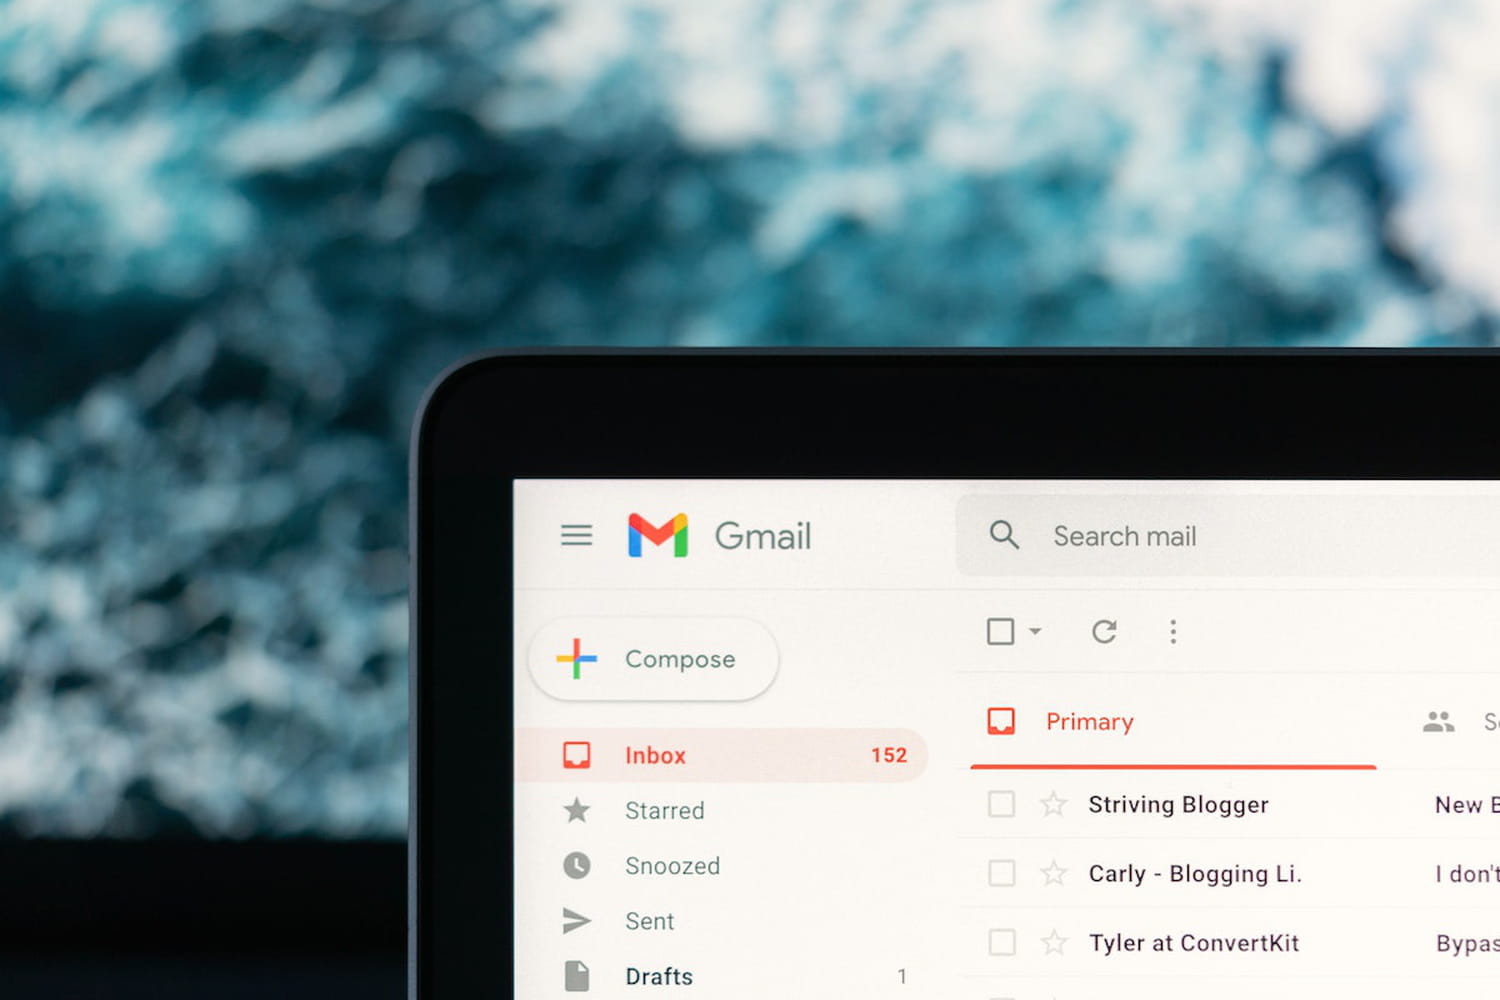 The new Gmail interface: How to activate it

